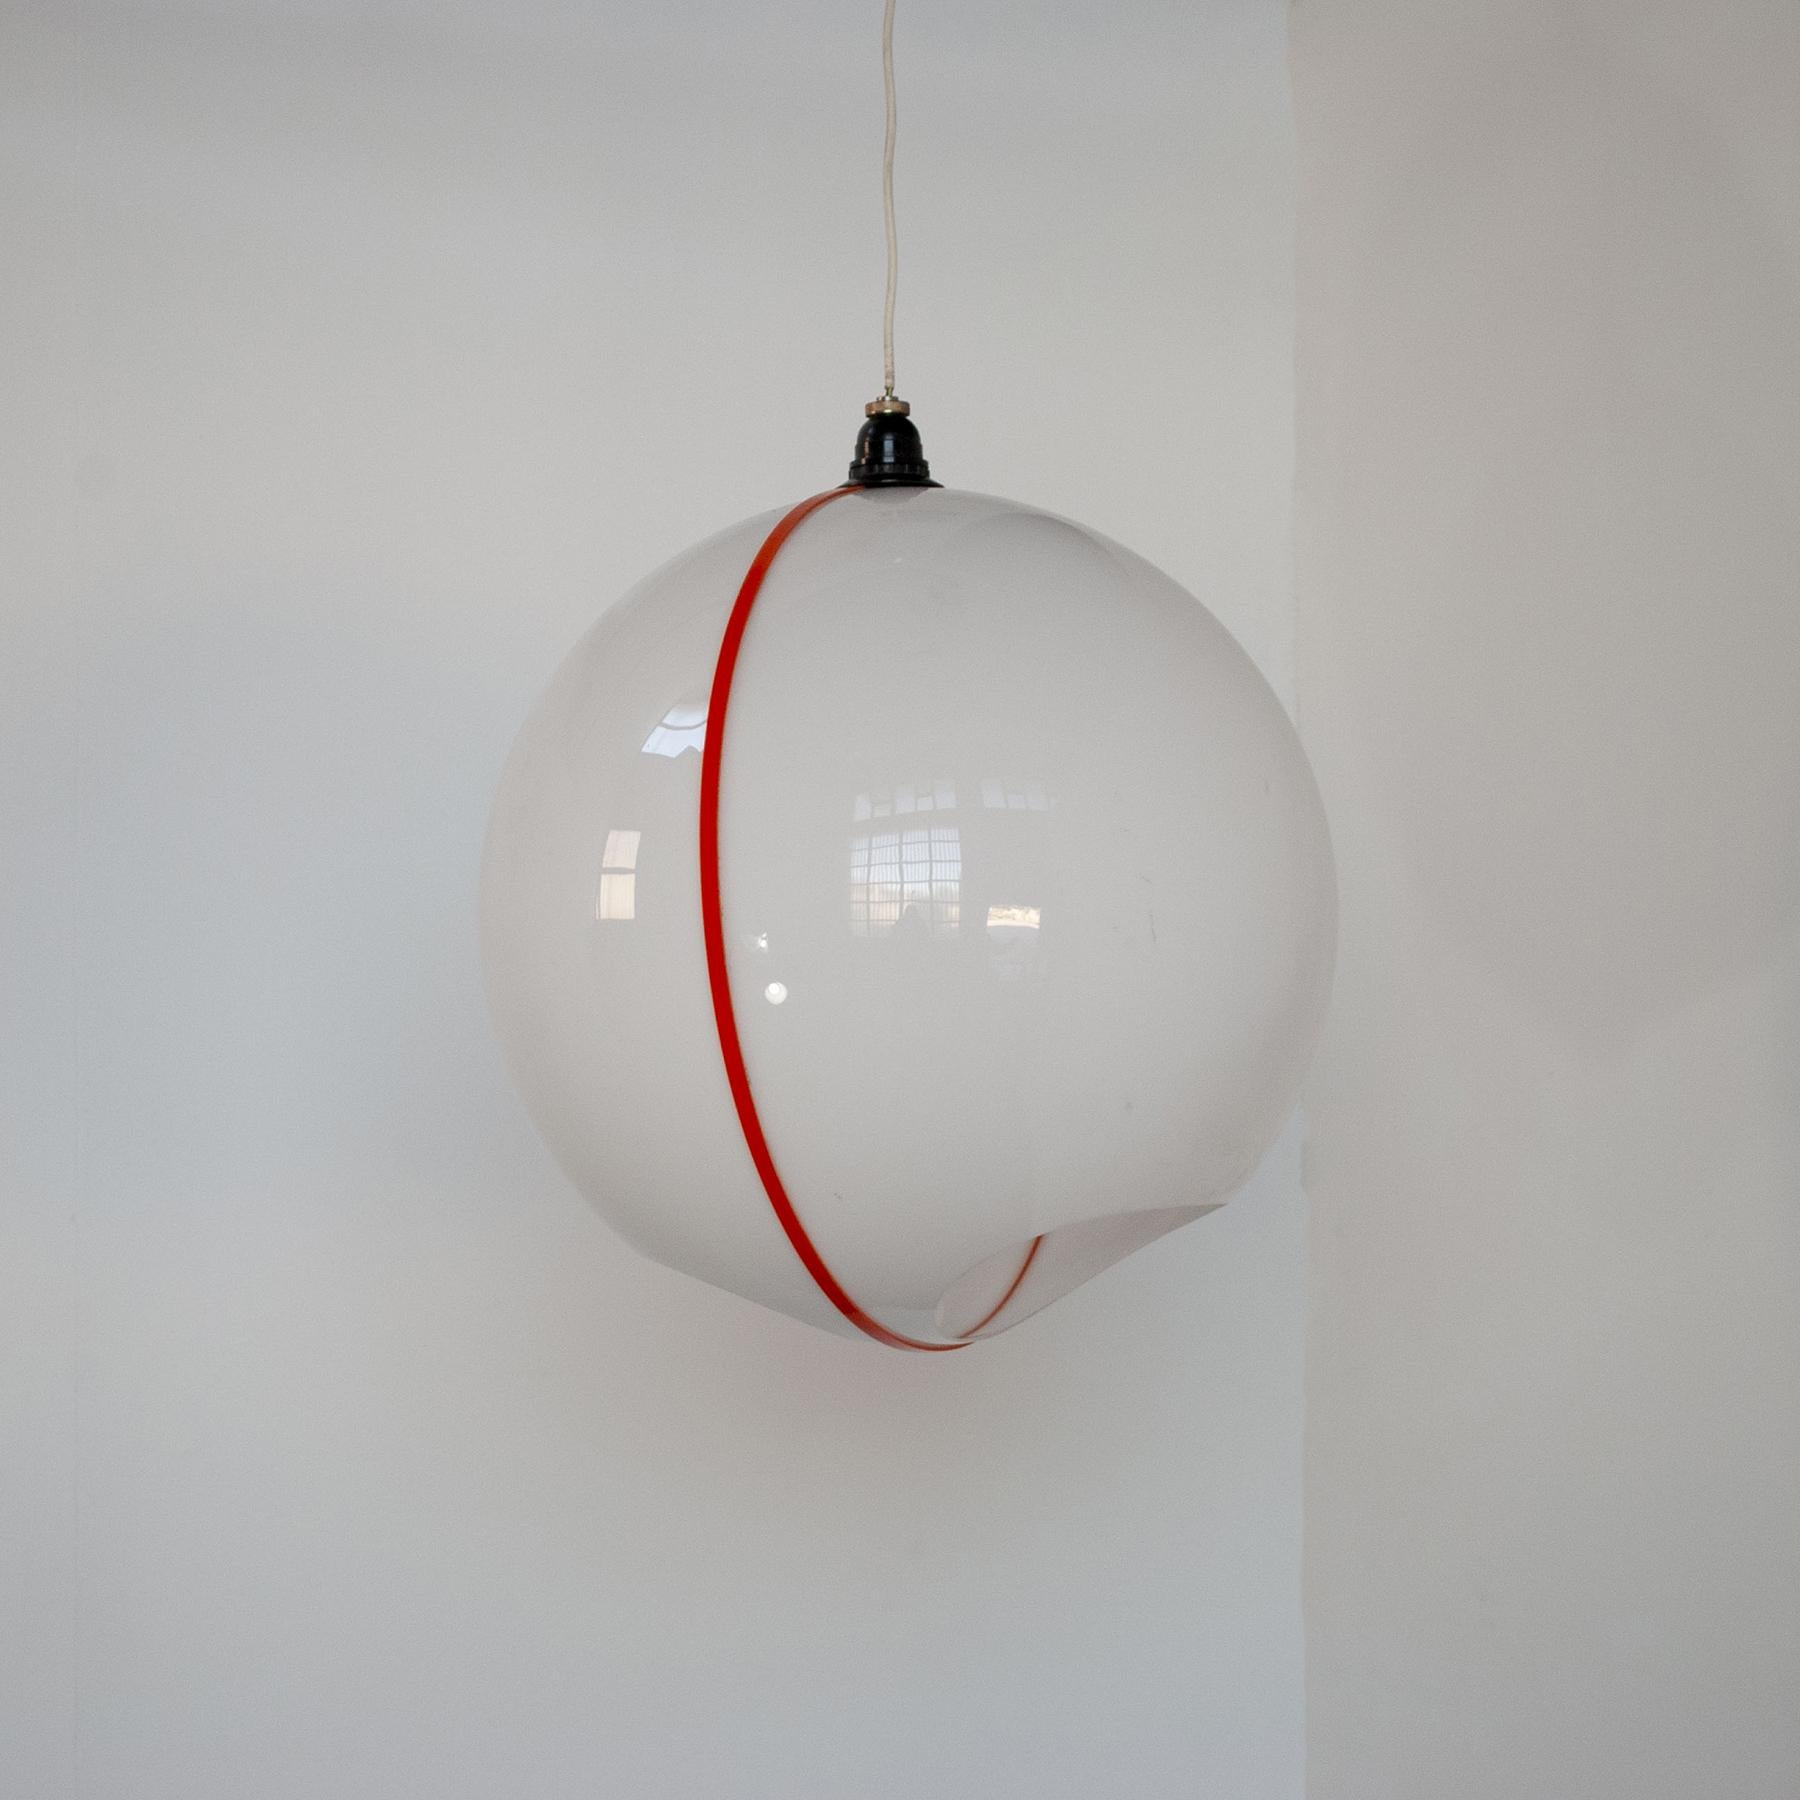 Plastic suspension sphere chandelier with two symmetrical holes on the bottom, an orange silk-screen printing on the entire circumference, Italian production from the 1970s.